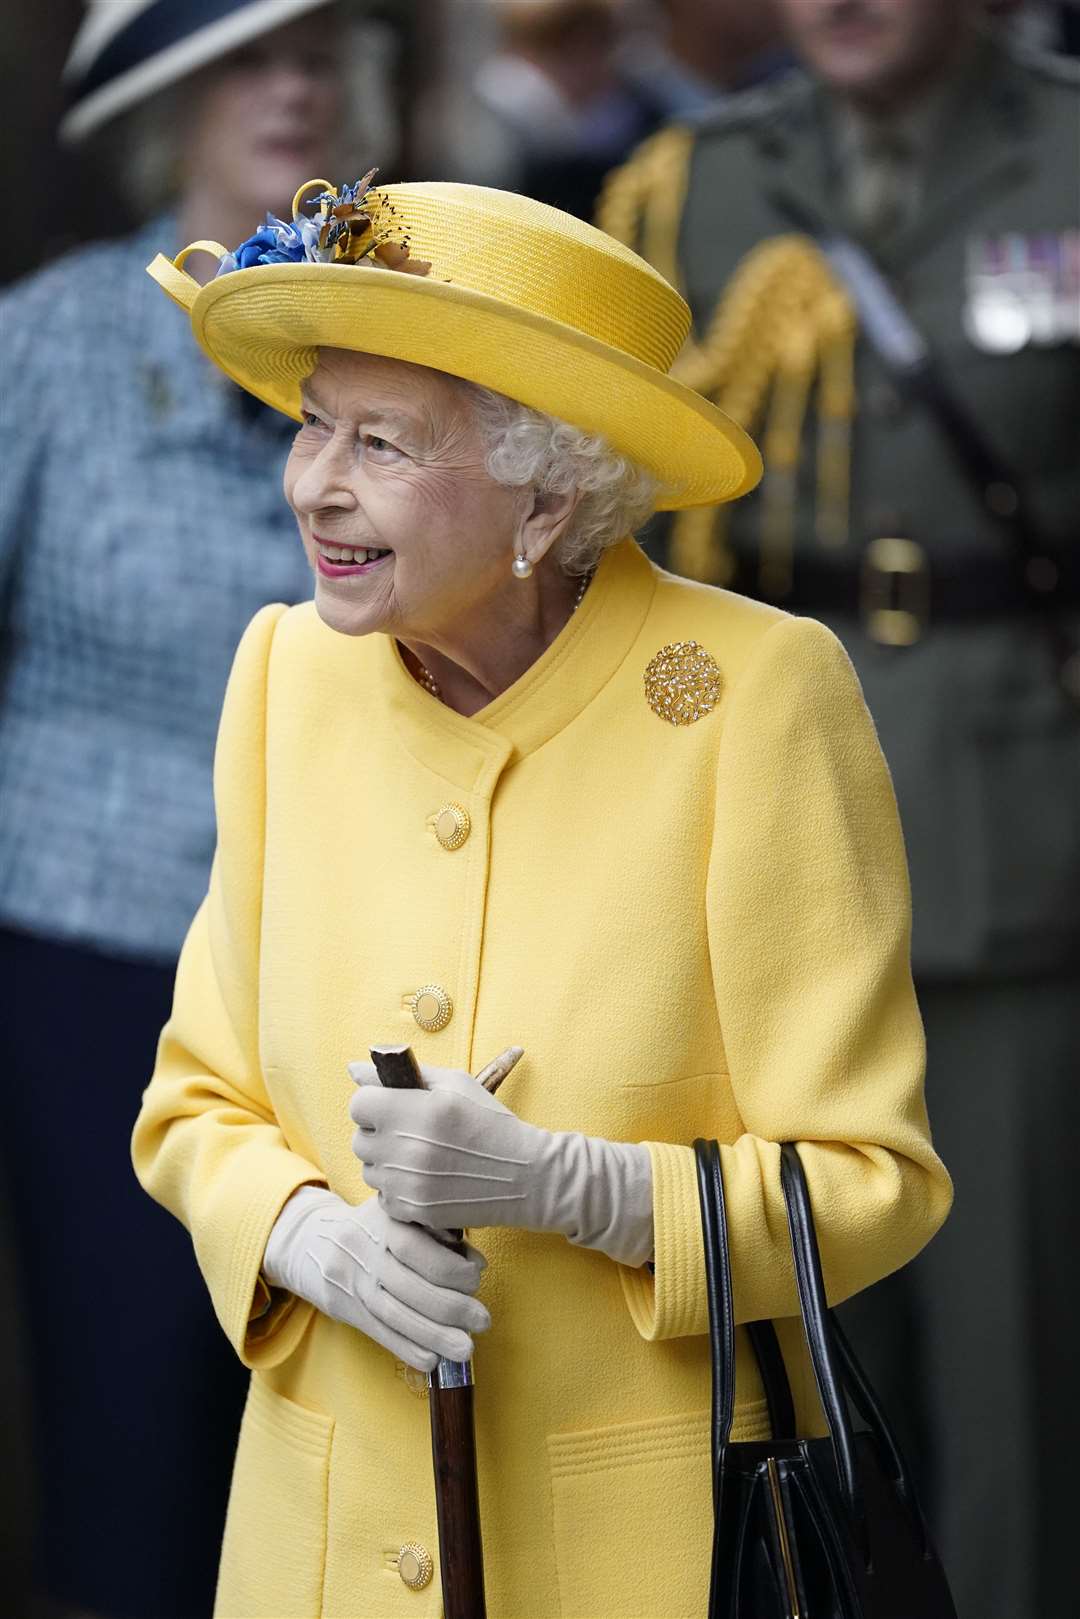 The Queen at Paddington station to mark the completion of London’s Crossrail project (Andrew Matthews/PA)